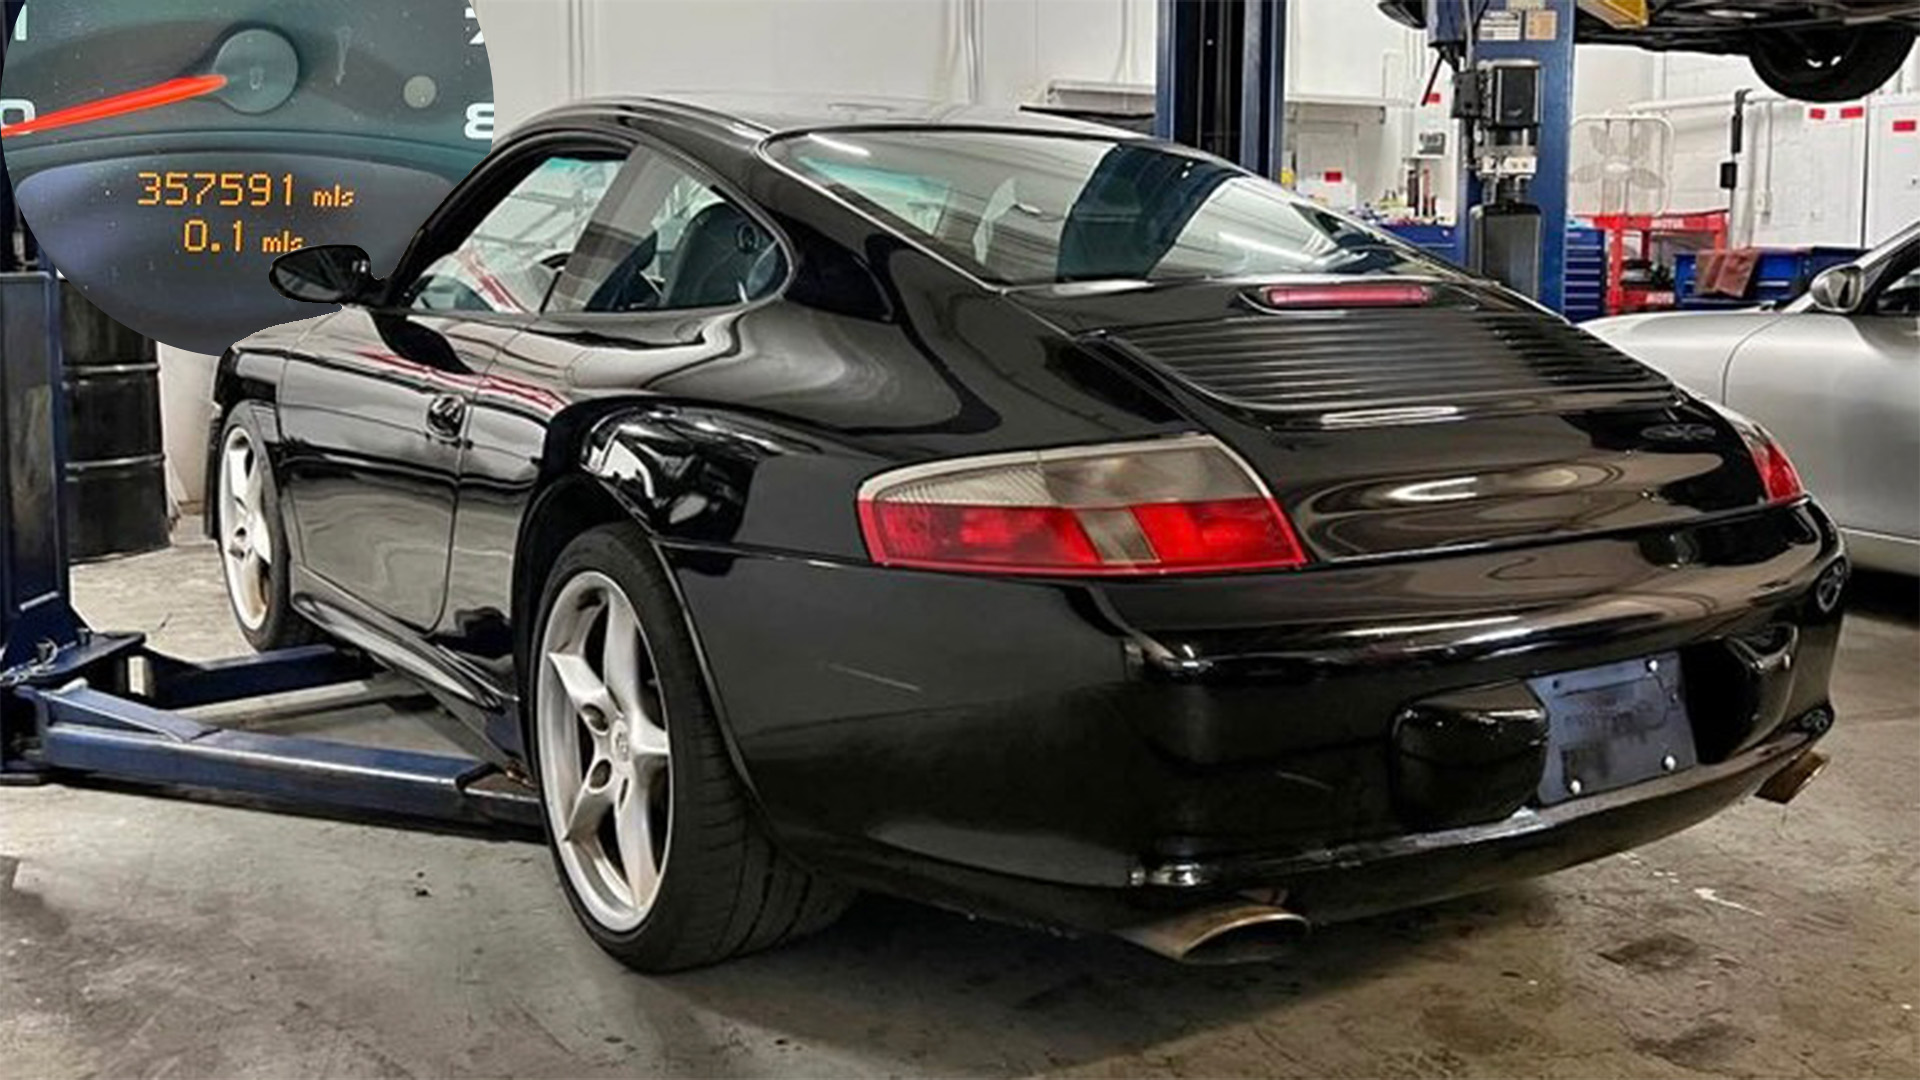 This $12,000 Porsche 911 With 357,000 Miles Is Your Risky Buy of the Day